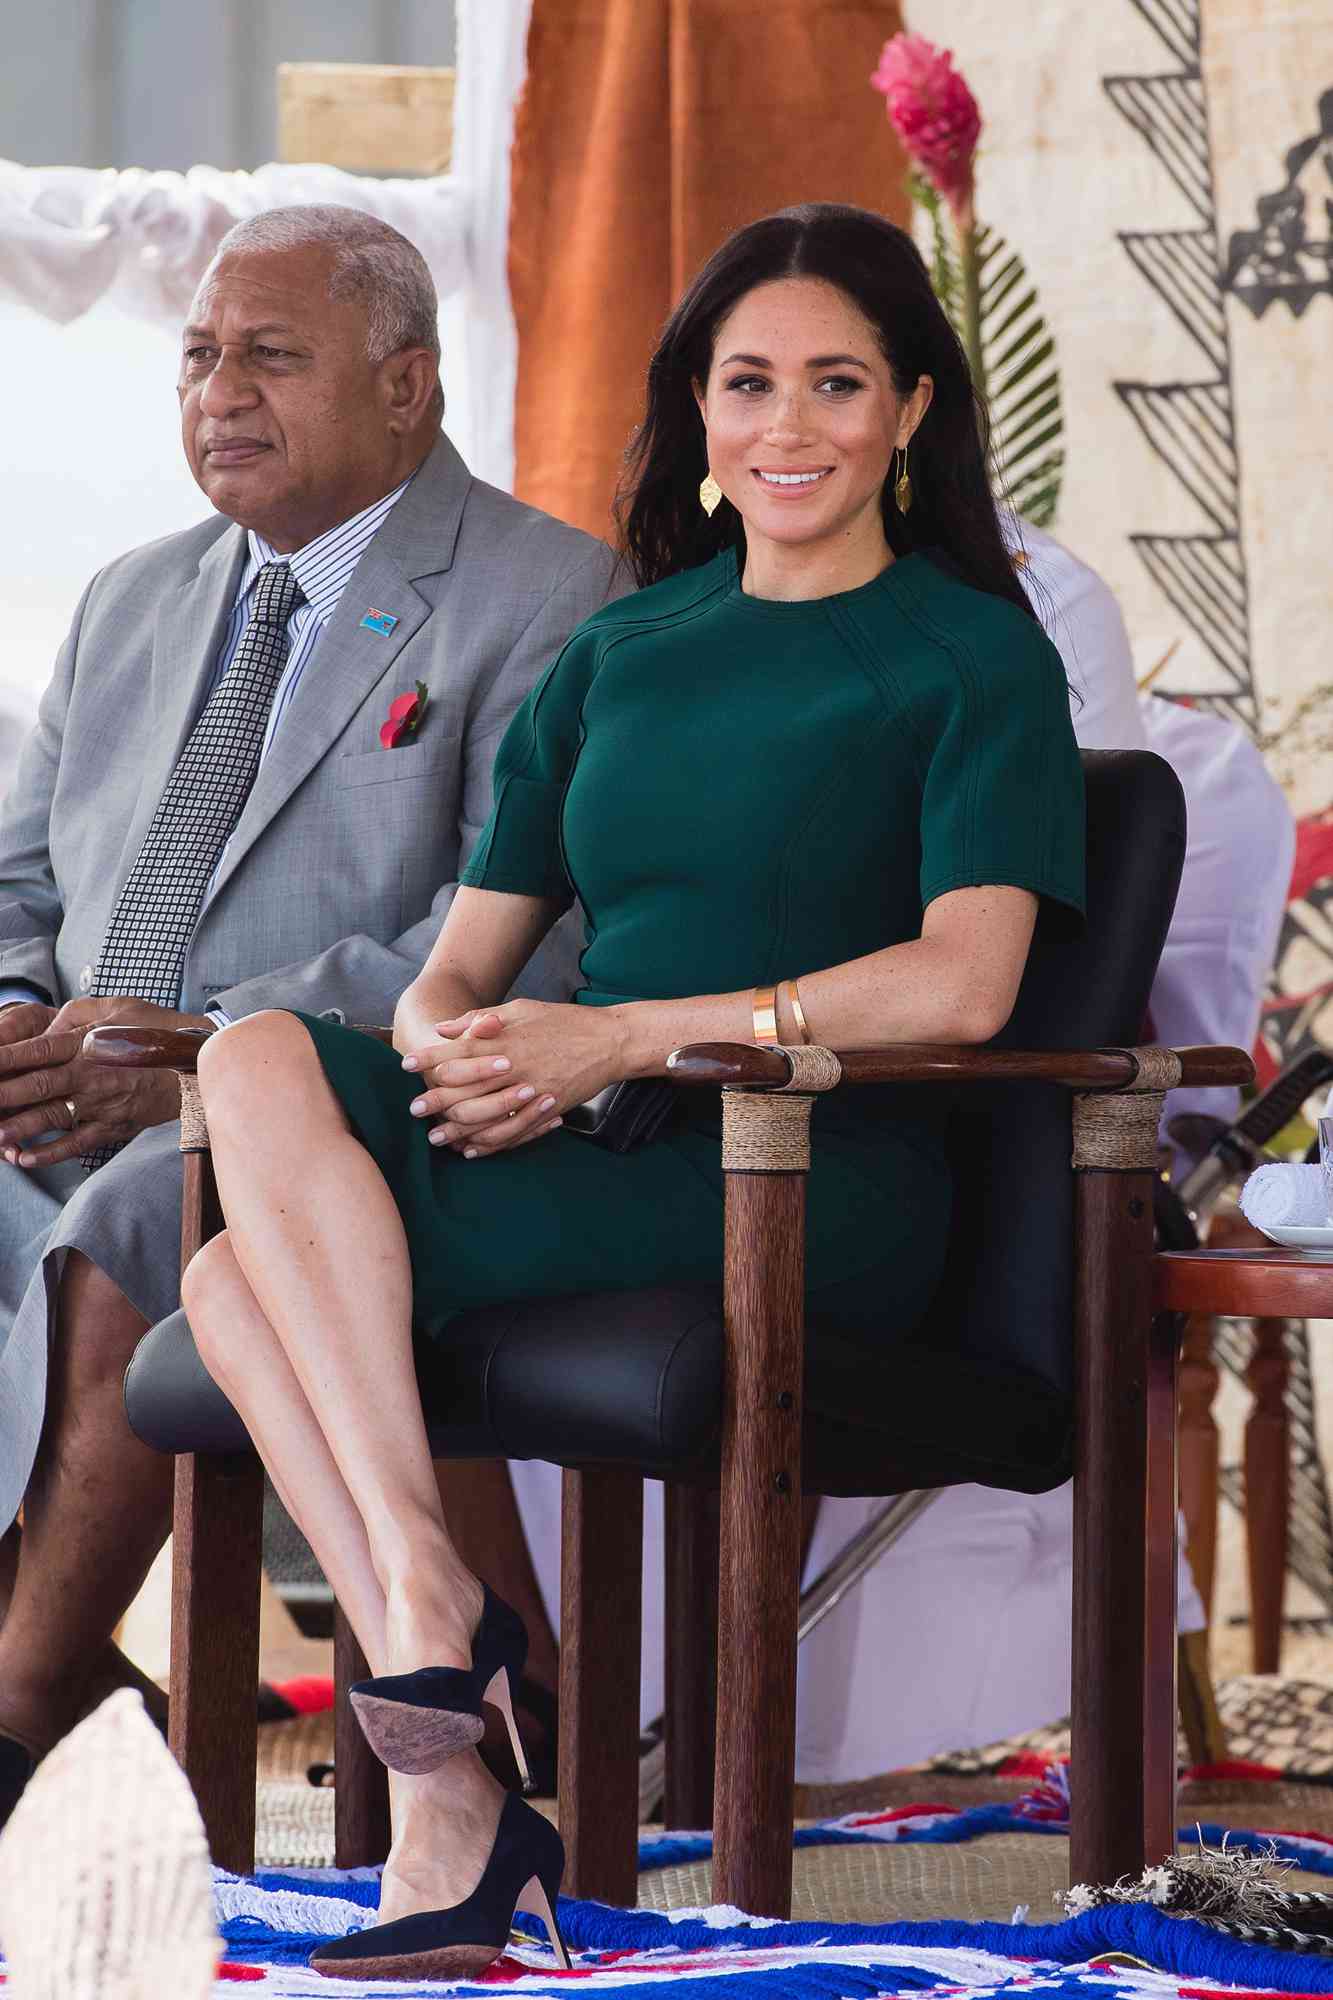 The Duke And Duchess Of Sussex Visit Fiji - Day 3